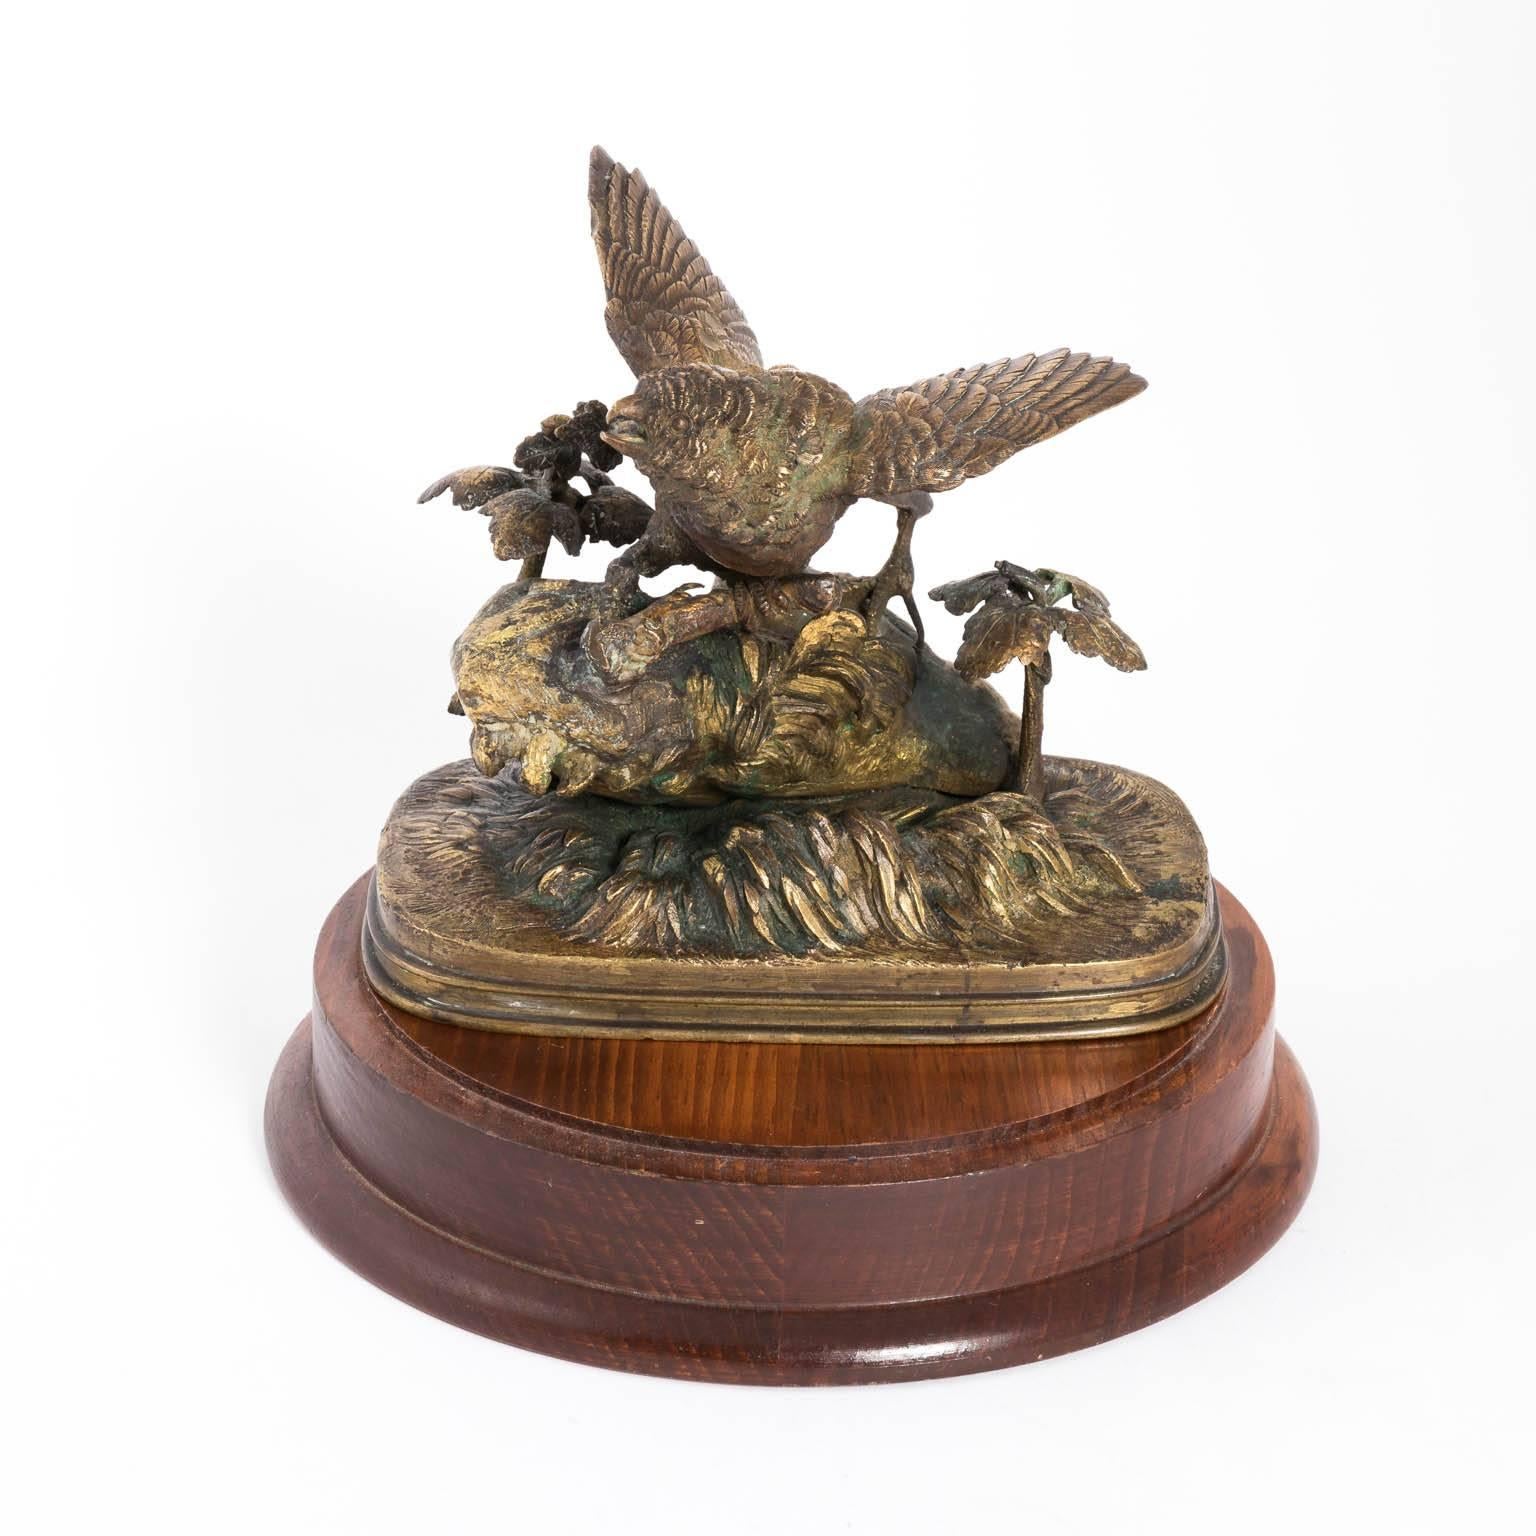 French bronze bird sculpture in a glass dome on a wooden base by Ferdinand Pautrot, circa 1895.
 